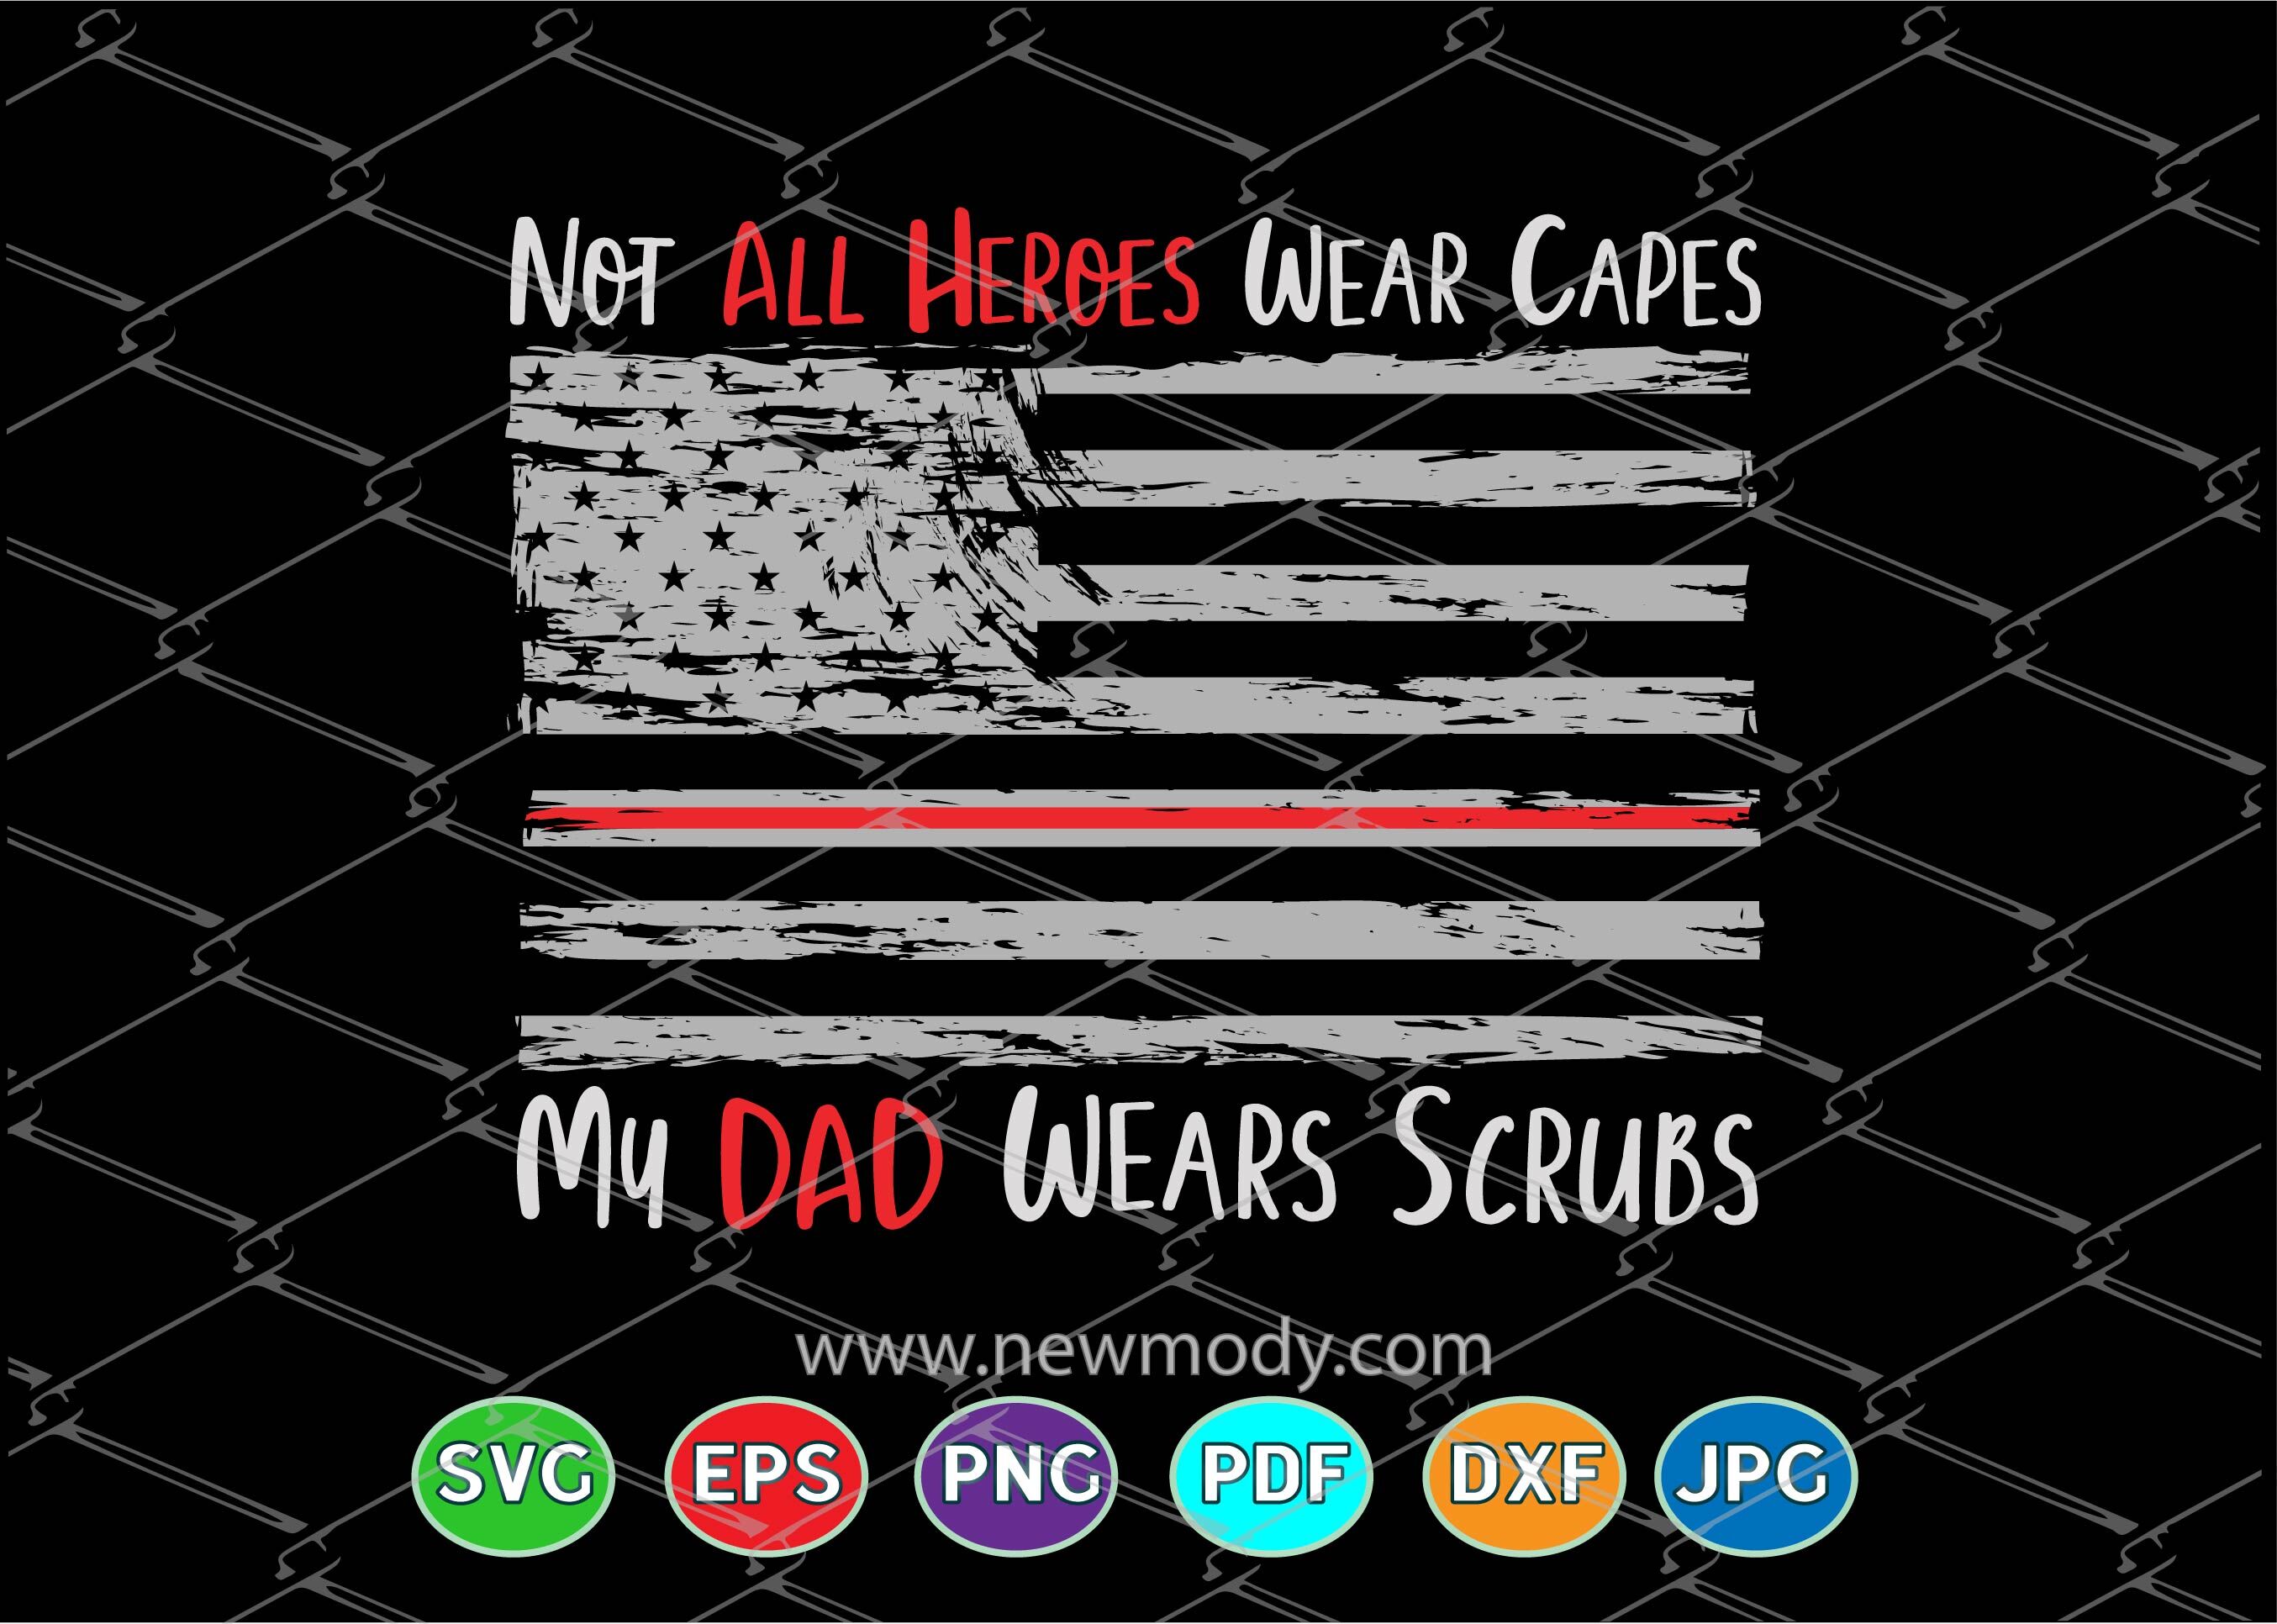 Not All Heroes Wear Capes SVG - My Dad Wears Scrubs Svg - Nurse SVG By